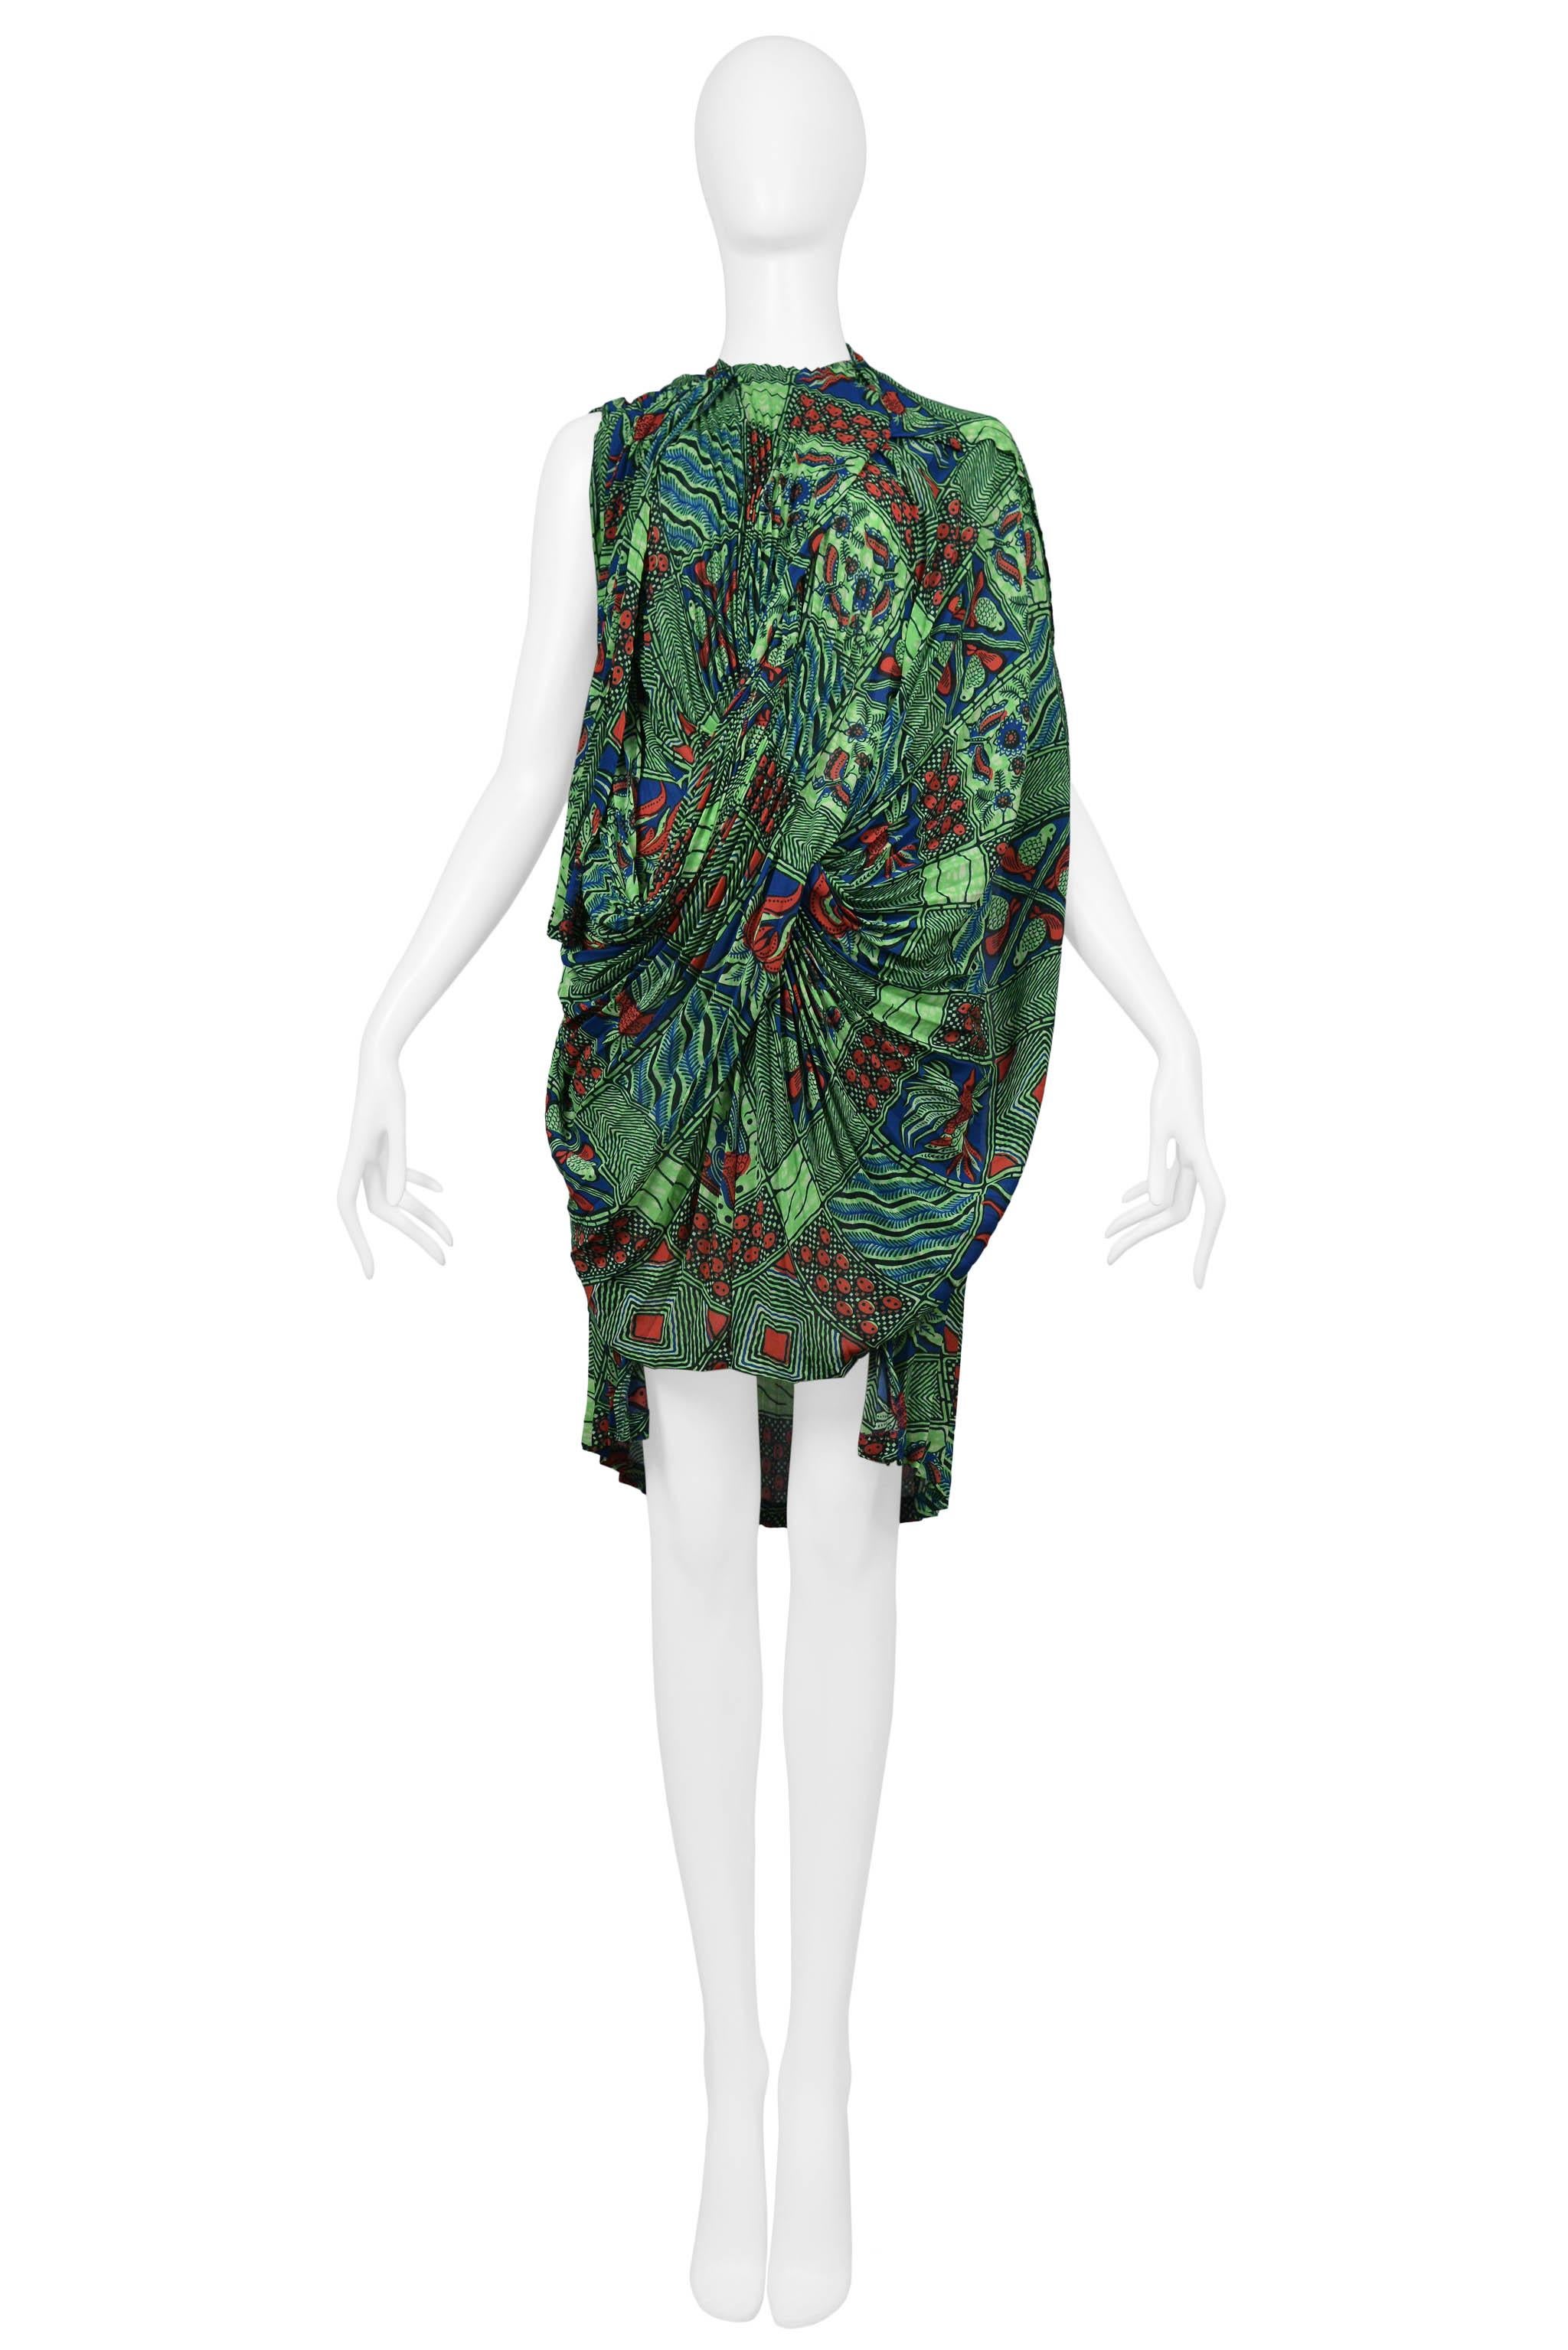 Resurrection Vintage is excited to offer a vintage Junya Watanabe Afrikaans print pleated dress featuring asymmetrical draping, high-low hemline, and one shawl sleeve. Collection 2009.

Junya Watanabe
Size: Small
Polyester 
2009 Collection
Excellent